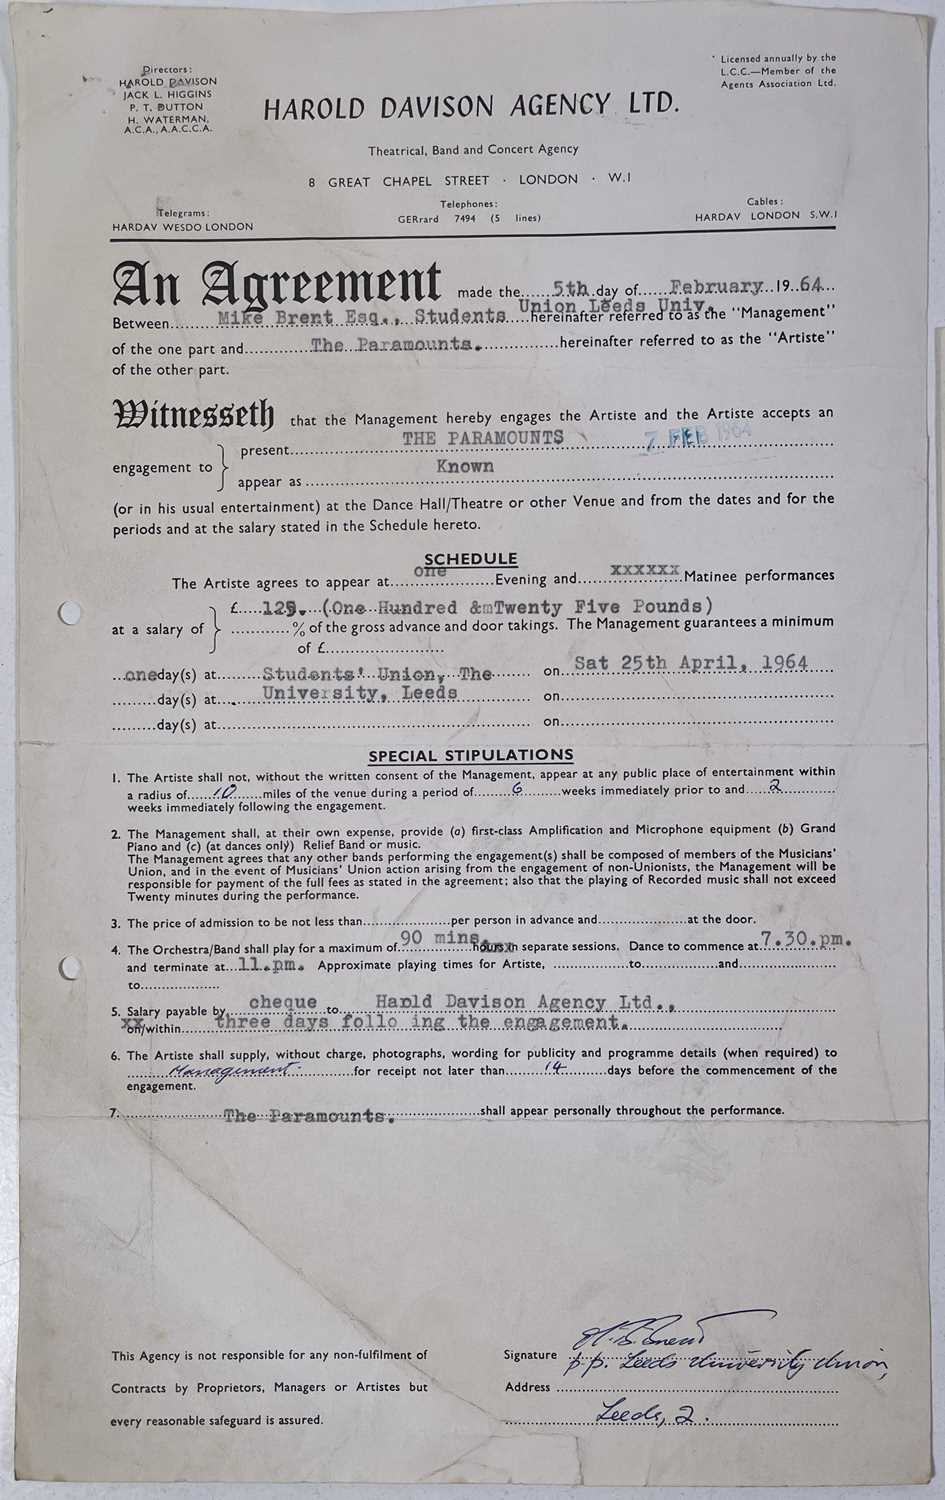 PROCOL HARUM INTEREST - THE PARAMOUNTS - 1964 BOOKING CONTRACTS. - Image 3 of 4